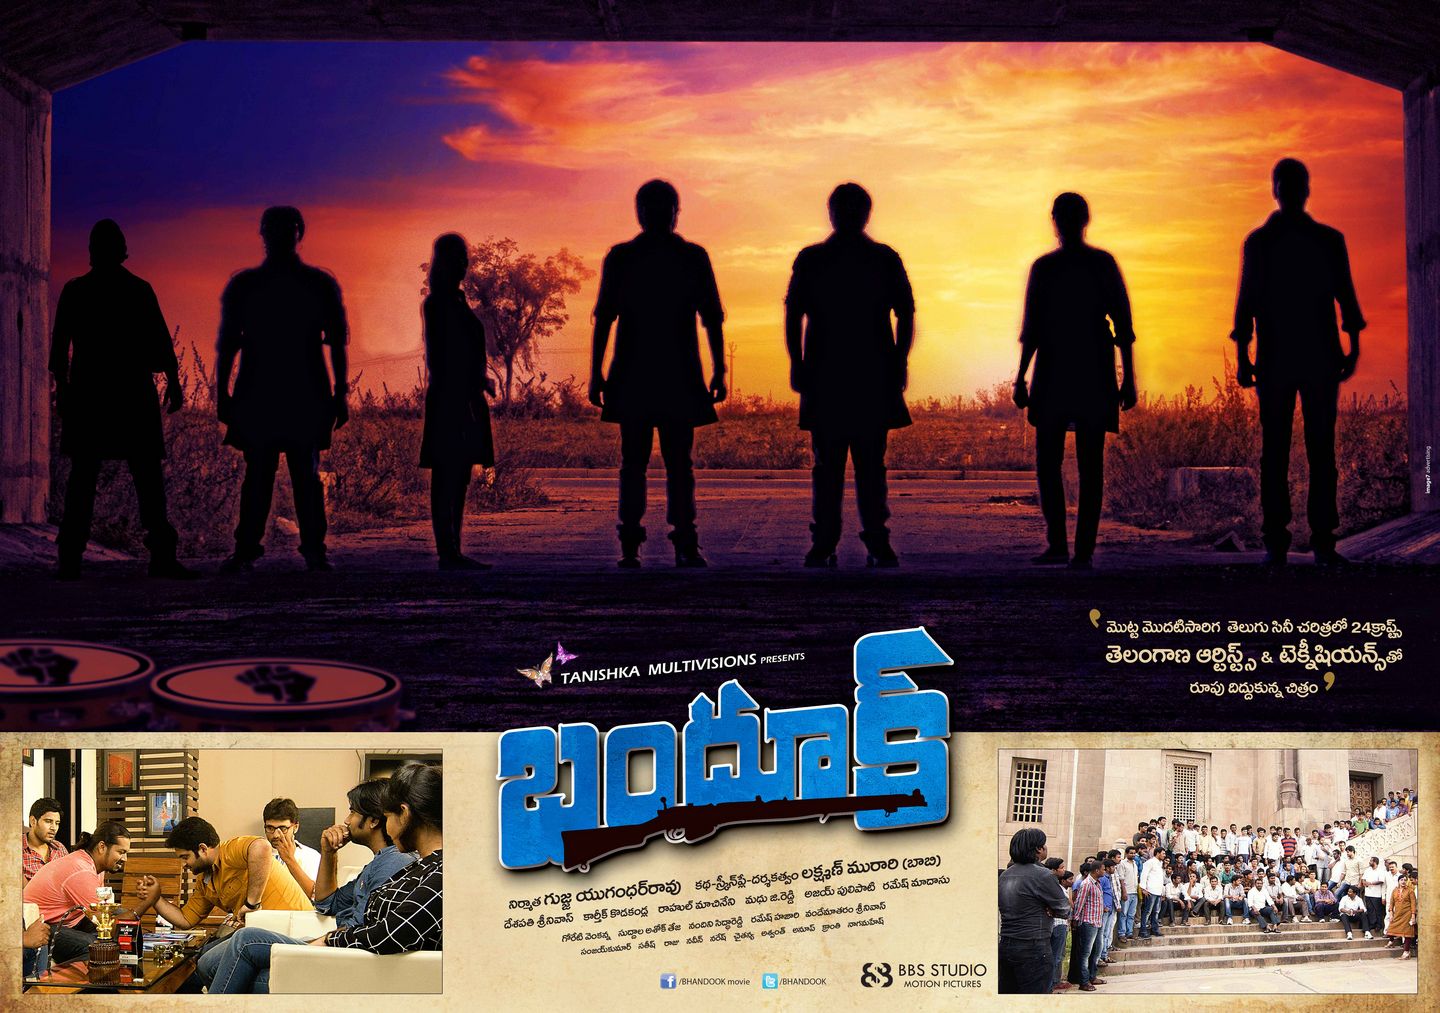 Bhandook Movie Wallpapers